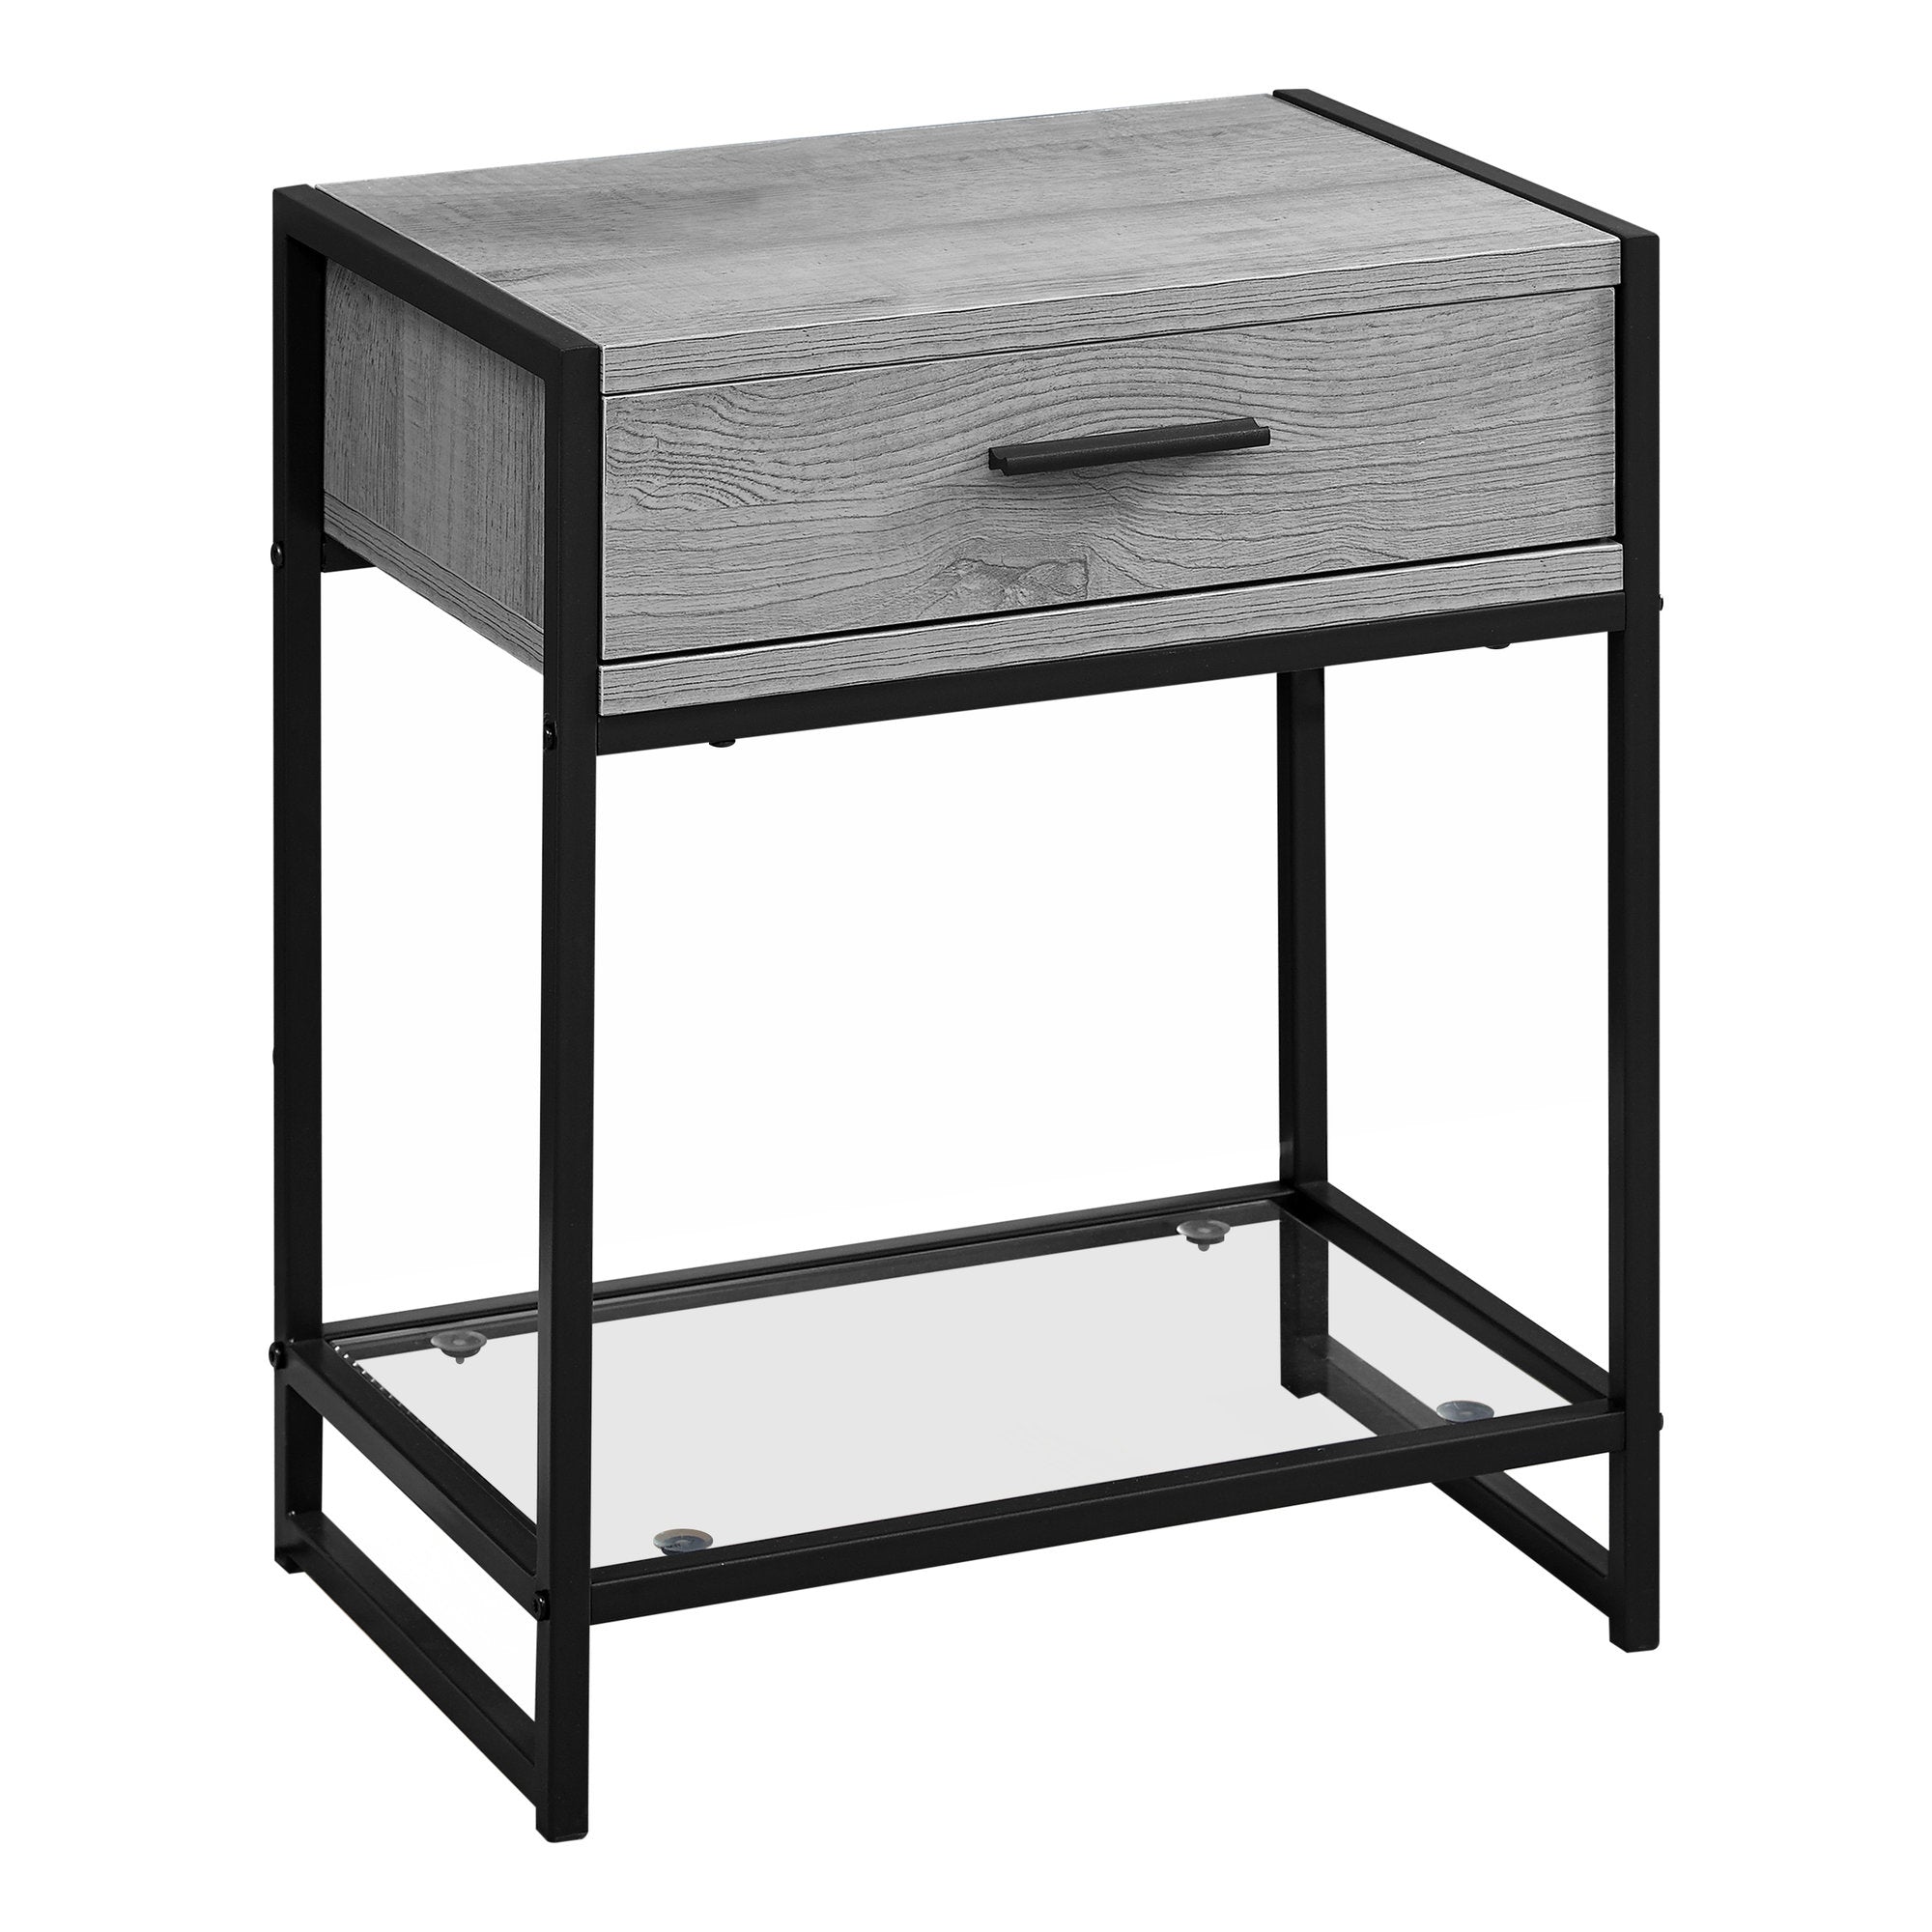 22" Black And Gray End Table With Drawer And Shelf